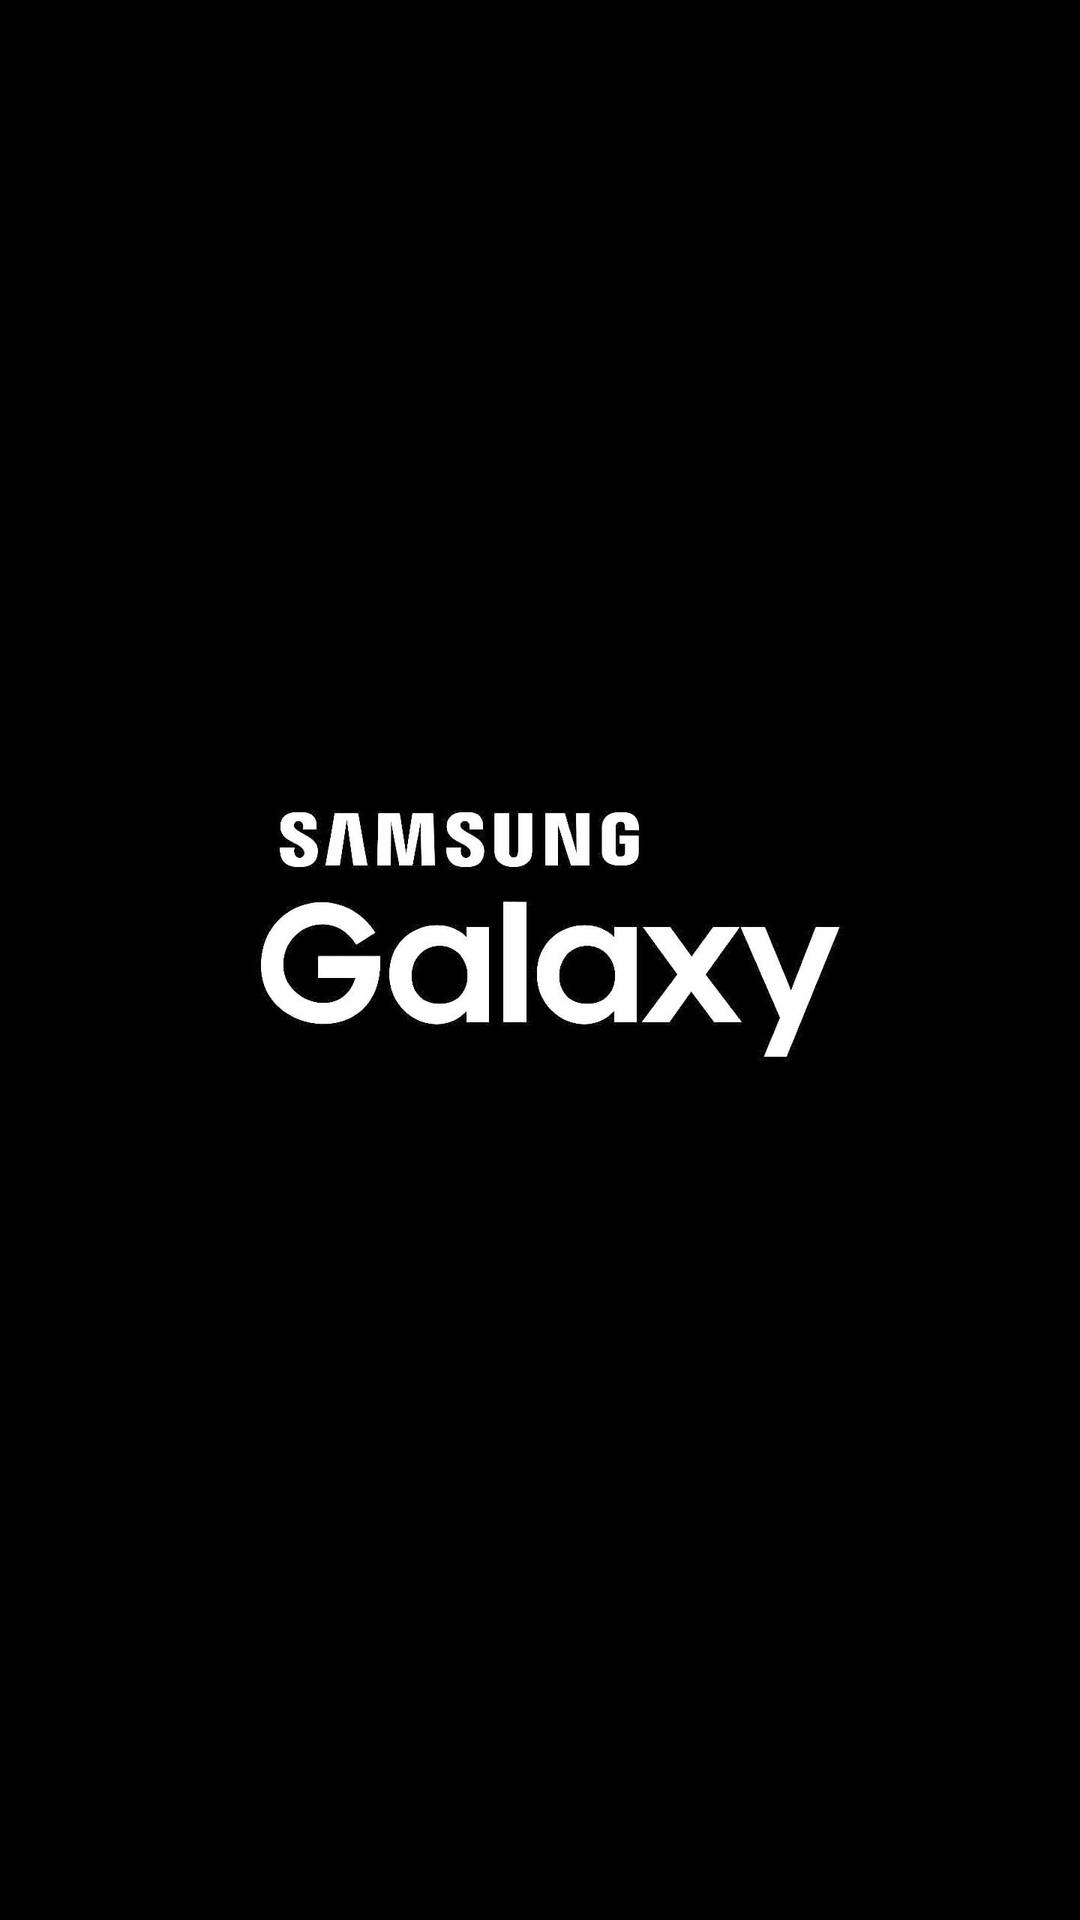 Samsung Full Hd Logo On Black Picture